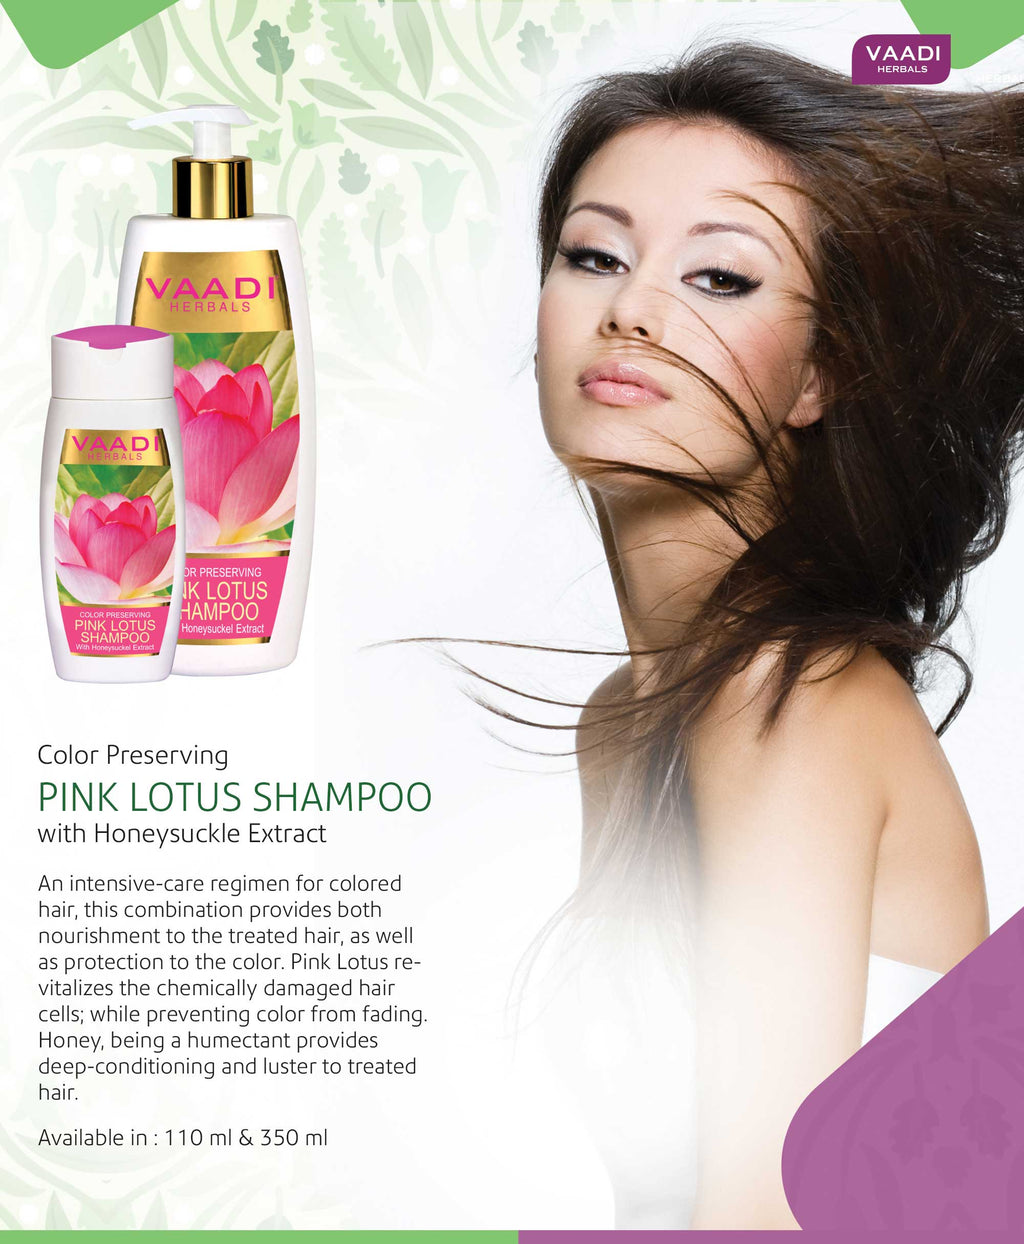 Color Preserving Organic Pink Lotus Shampoo with Honeysuckle Extract 